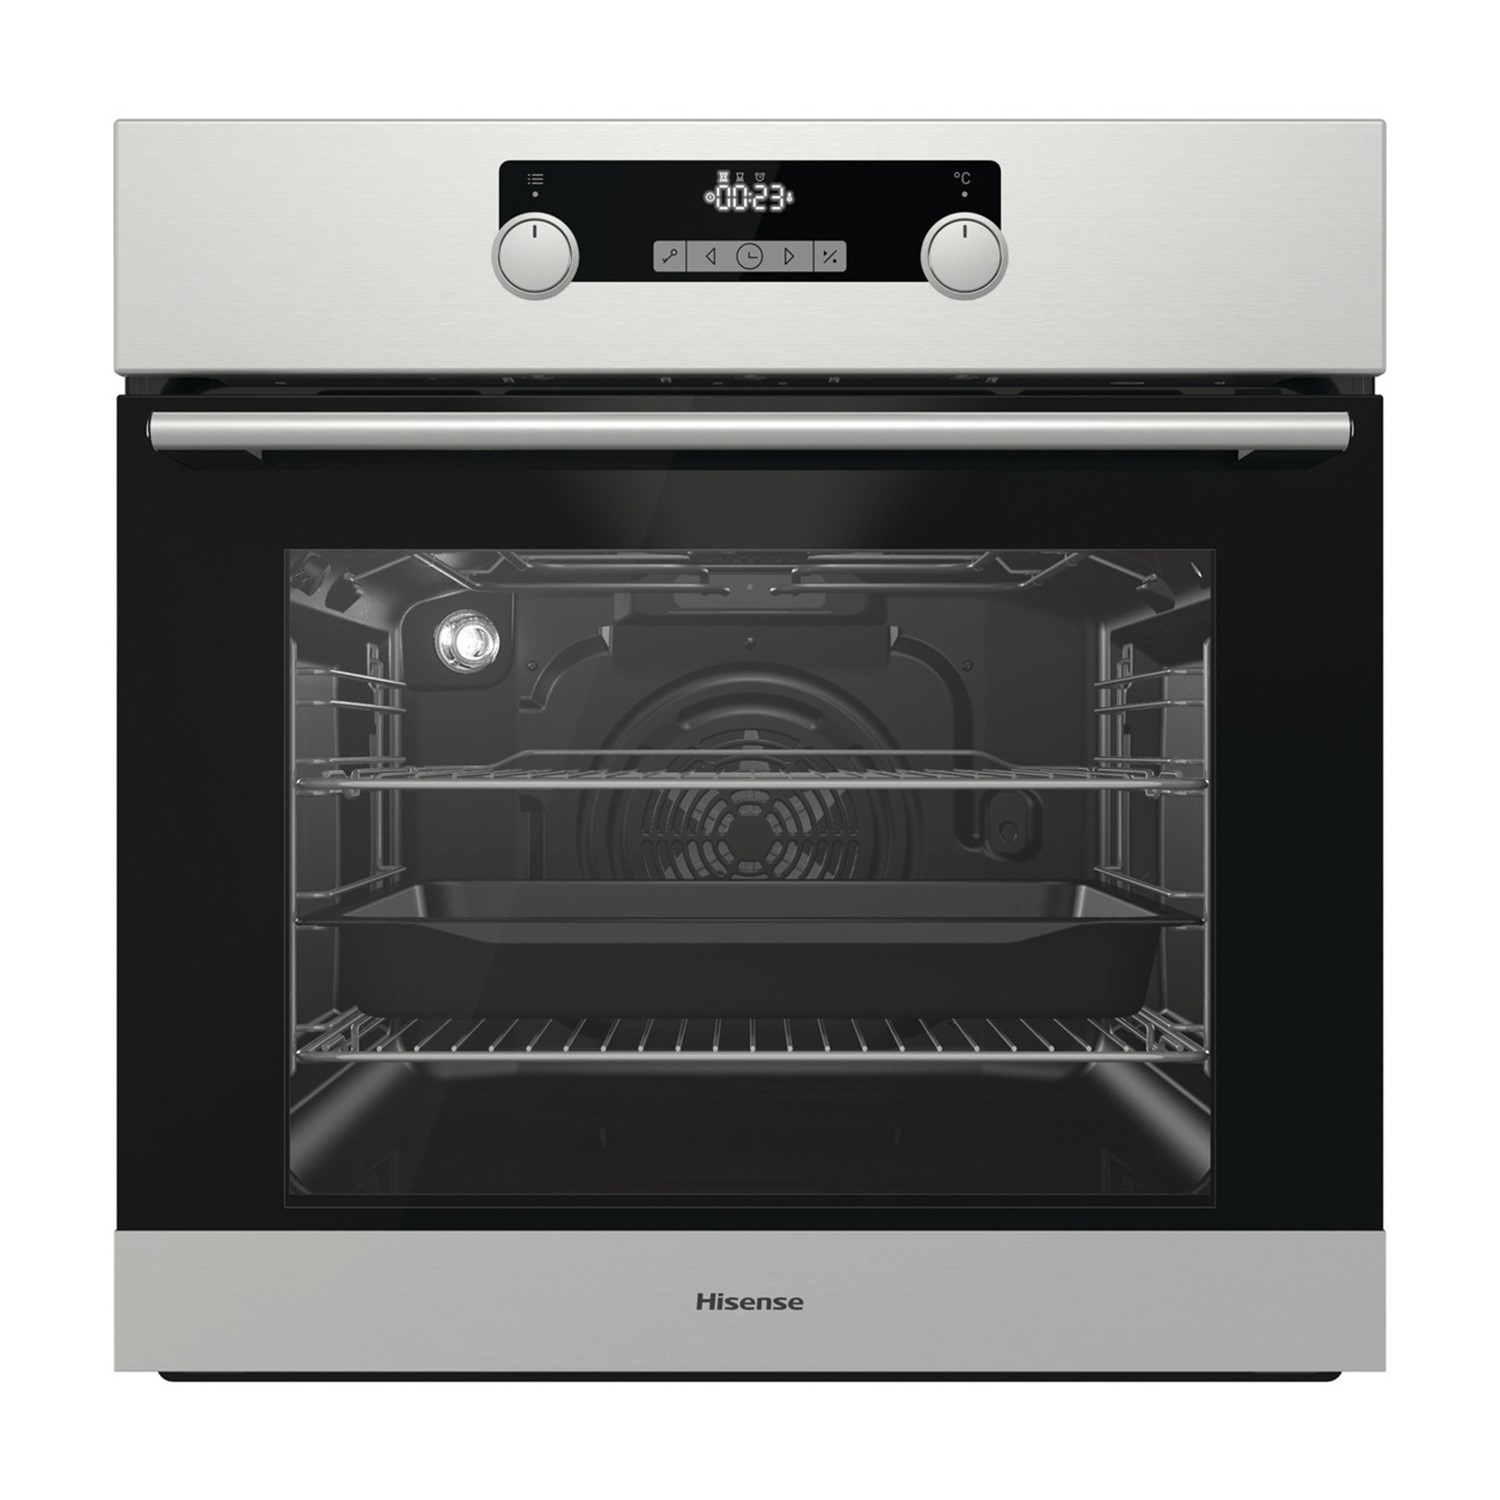 Hisense BI3221AXUK Built In Electric Single Oven - Stainless Steel - A Rated